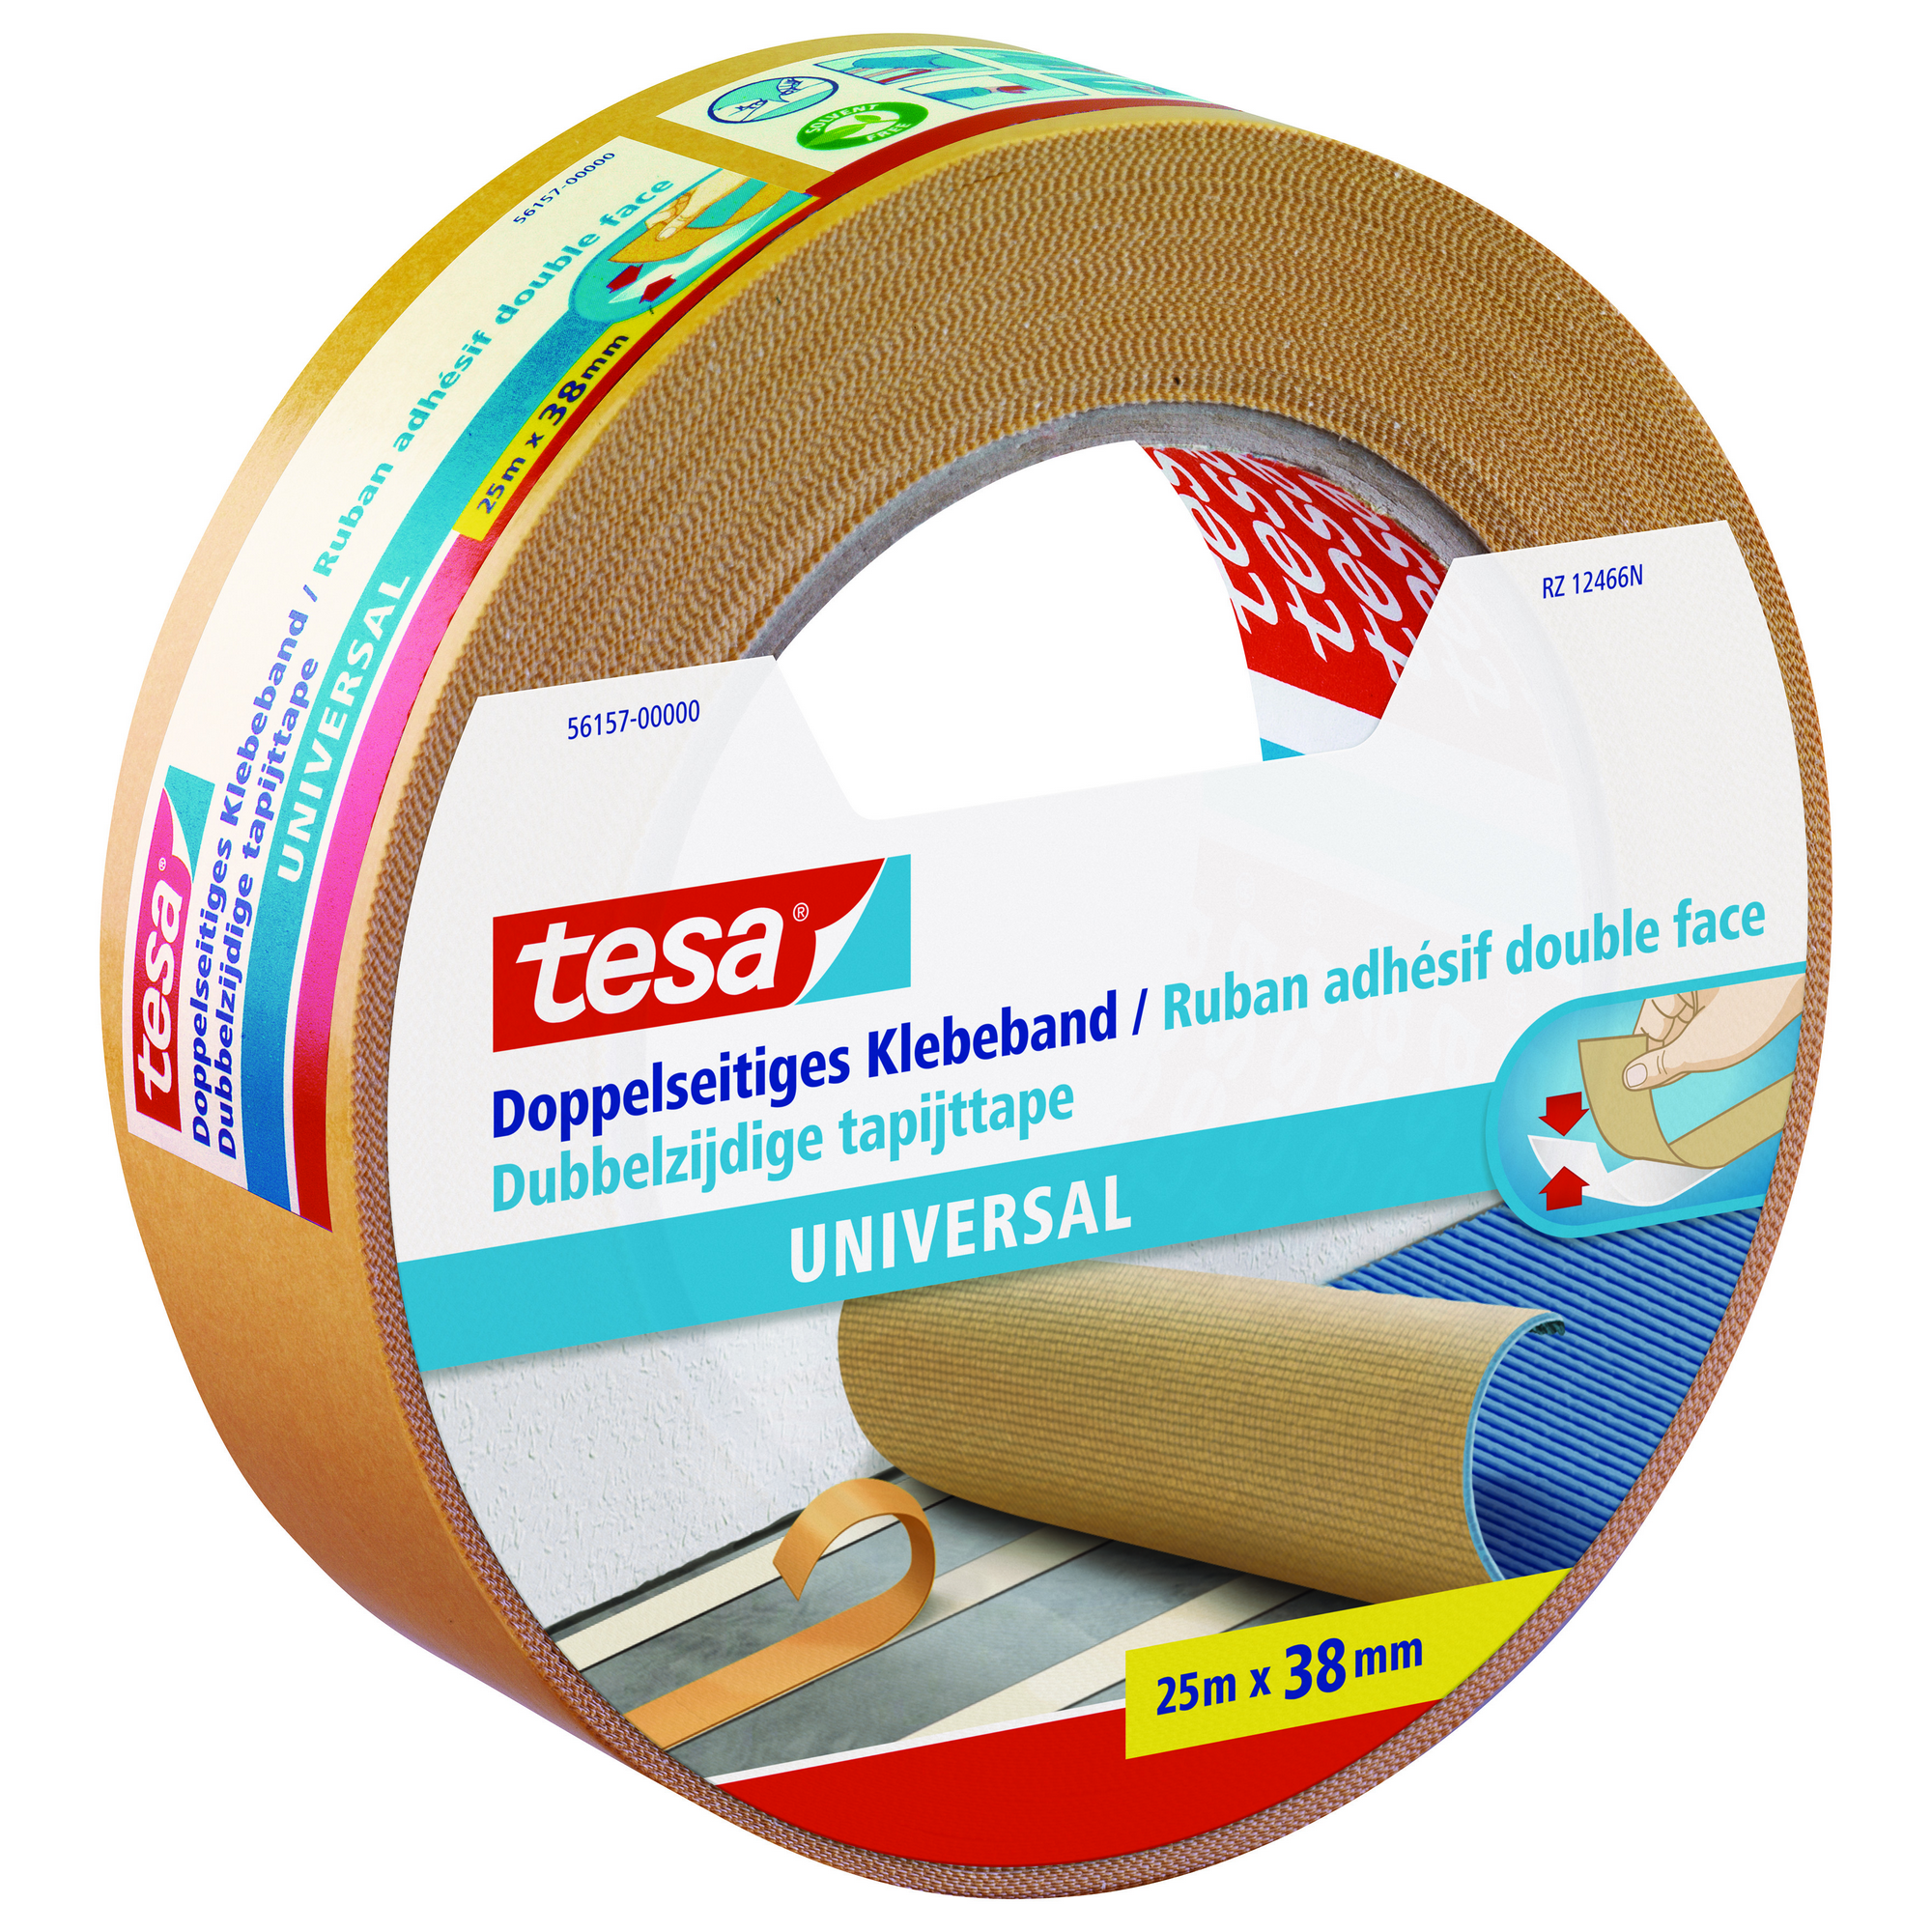 Doppelseitiges Klebeband 'Universal' 25 m + product picture